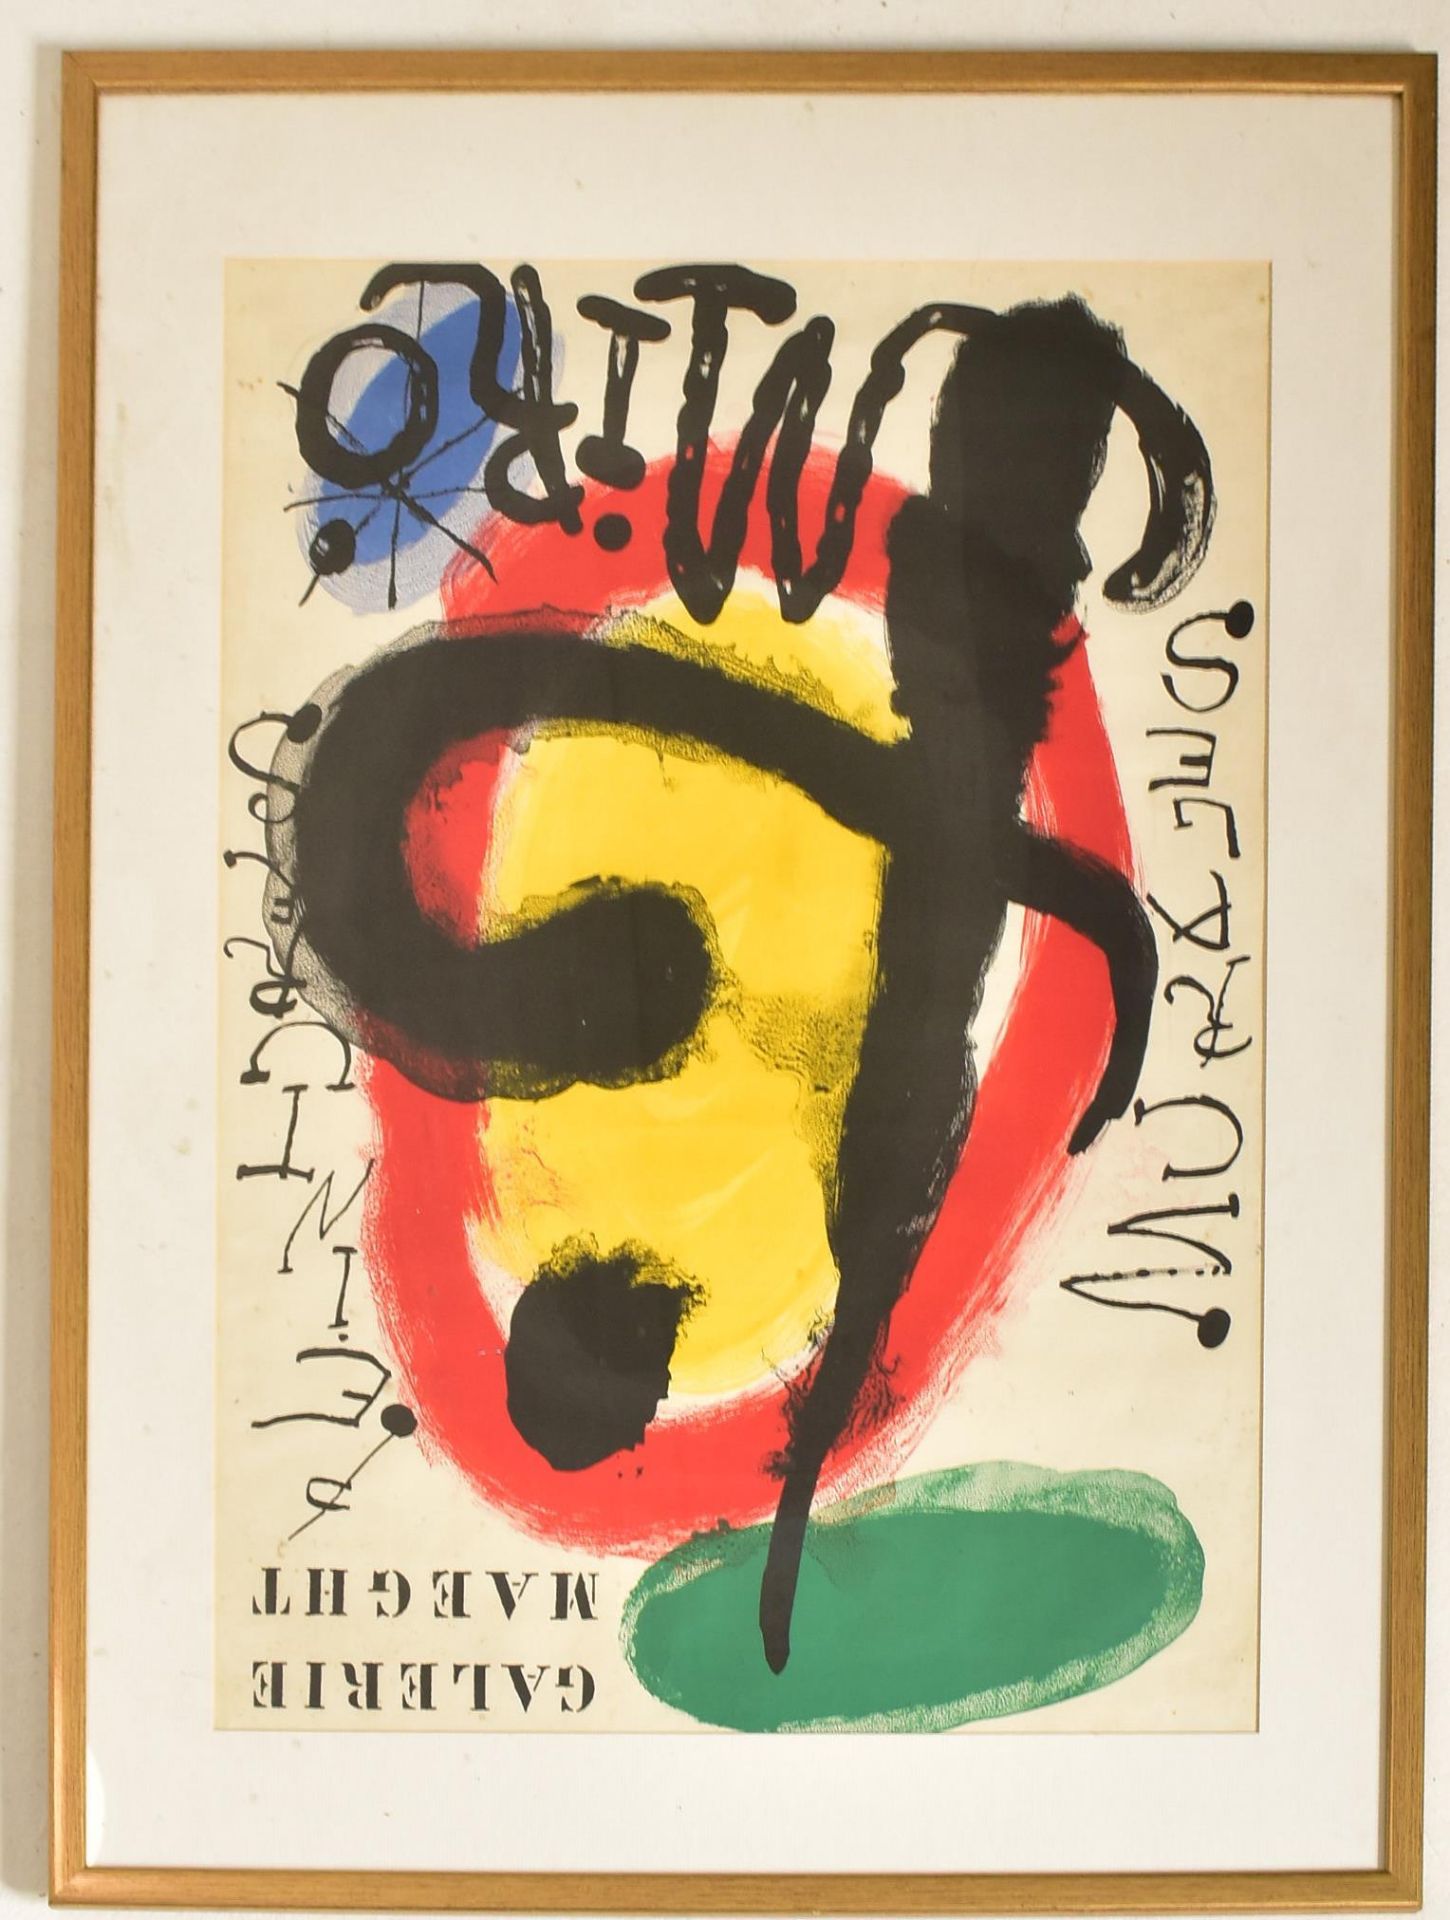 JOAN MIRO / GALERIE MAEGHT - 20TH CENTURY EXHIBITION POSTER - Image 2 of 5